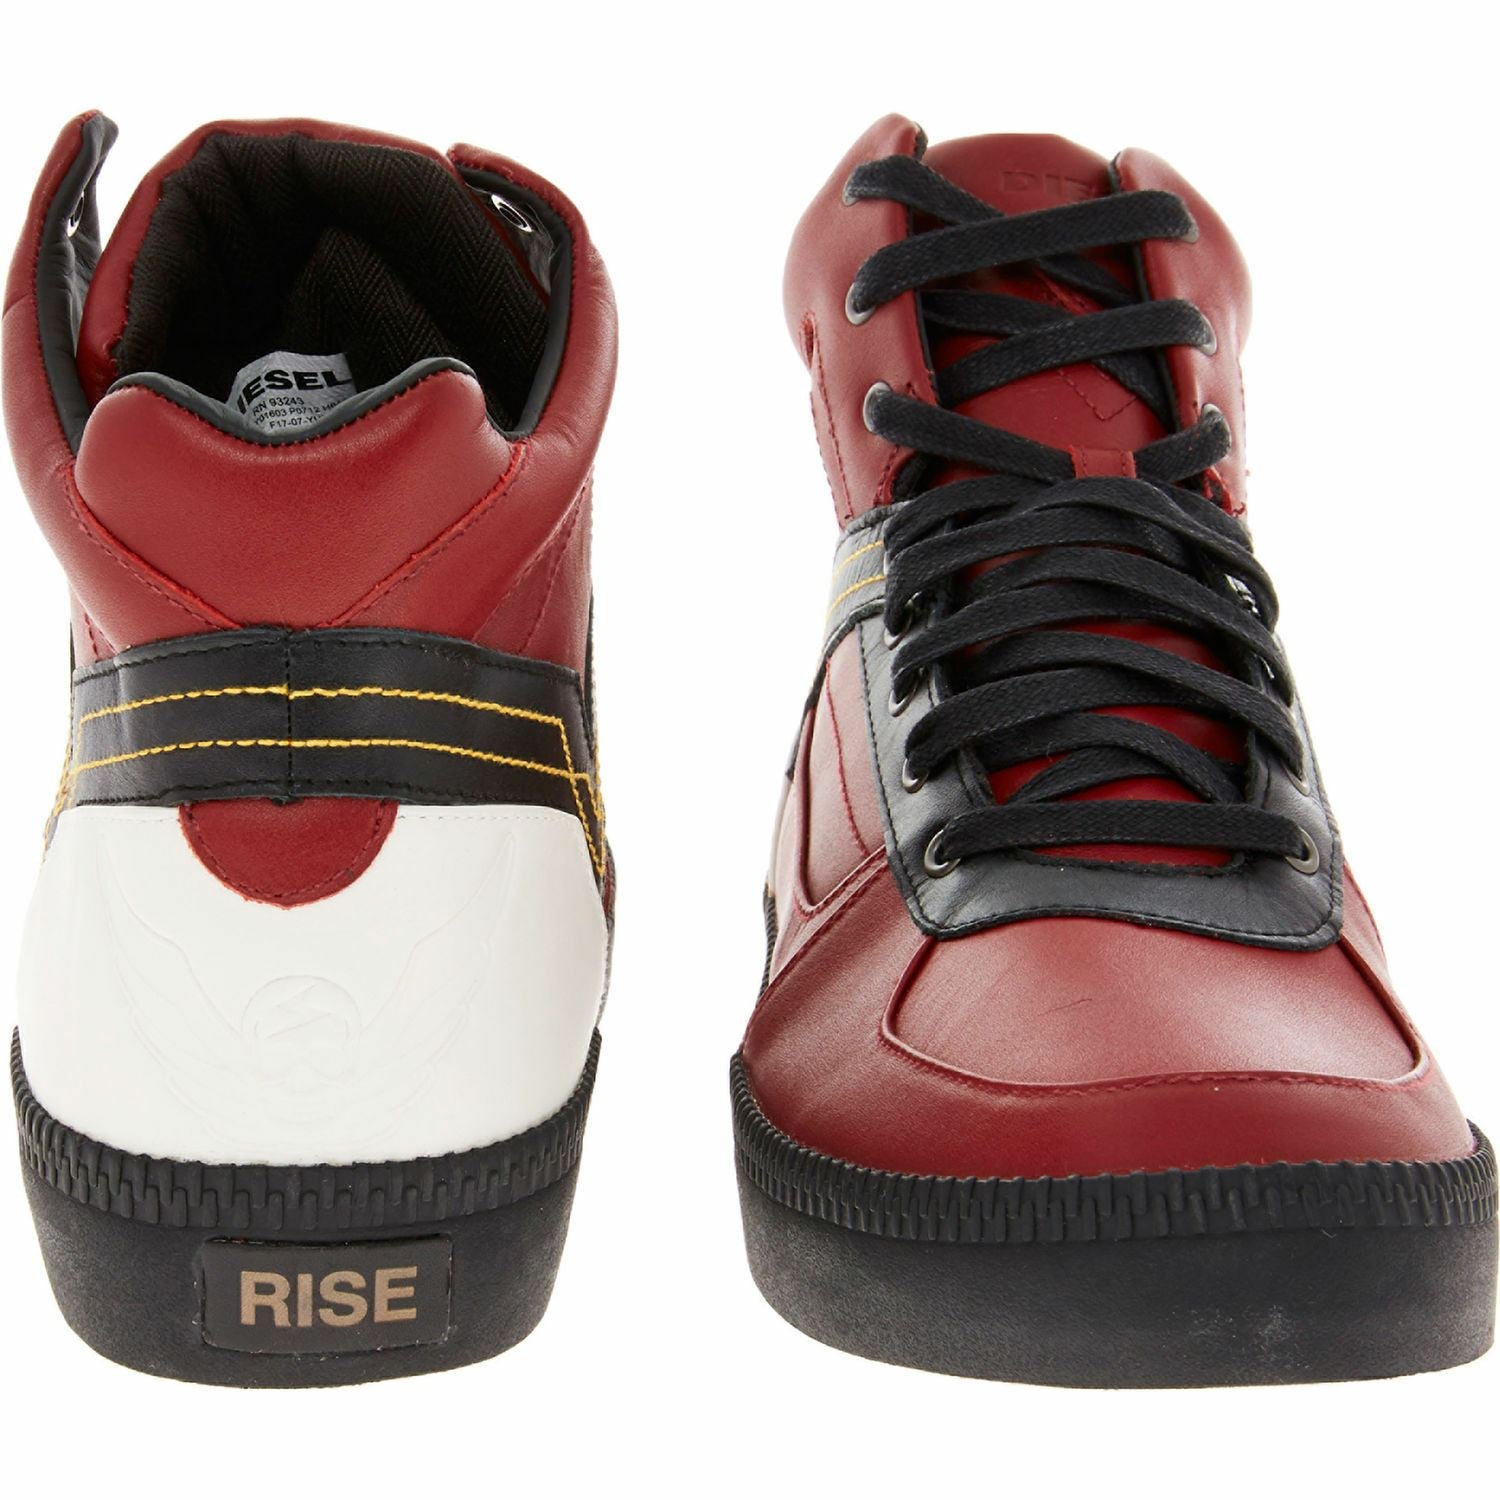 DIESEL Men's 'Street Fighter' 5 M.BISO Limited Edition Trainers